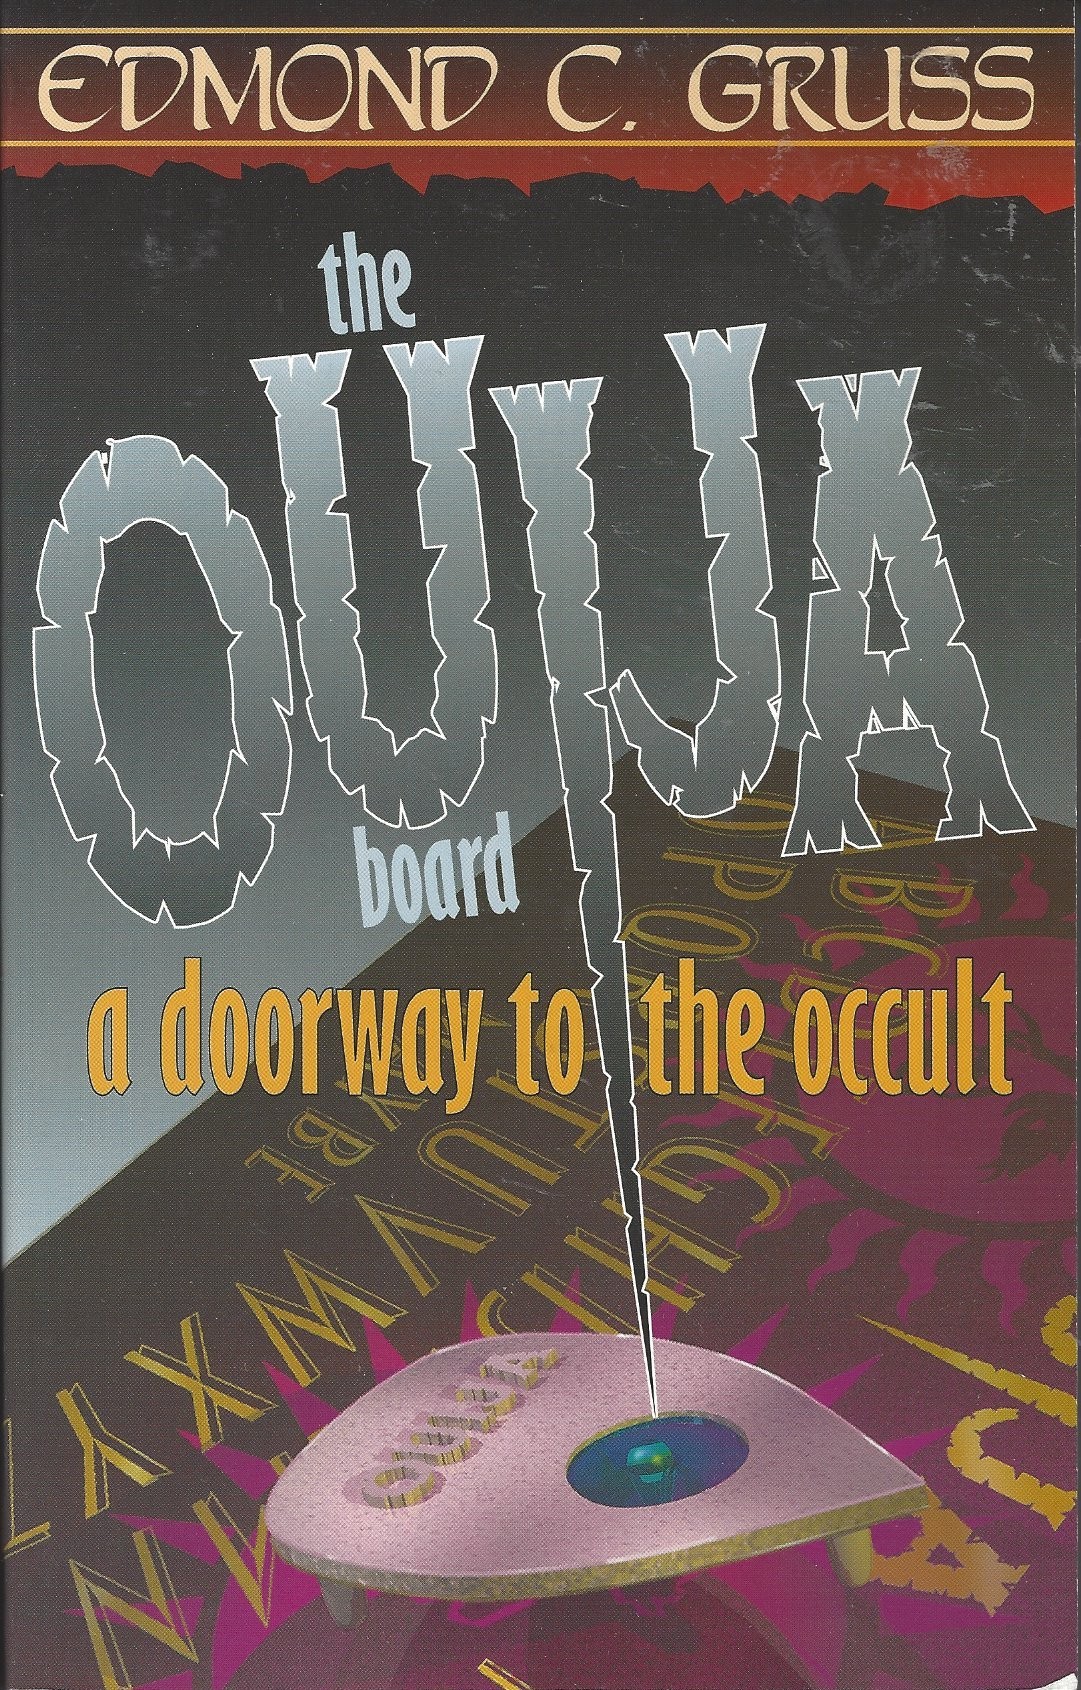 The Ouija Board front